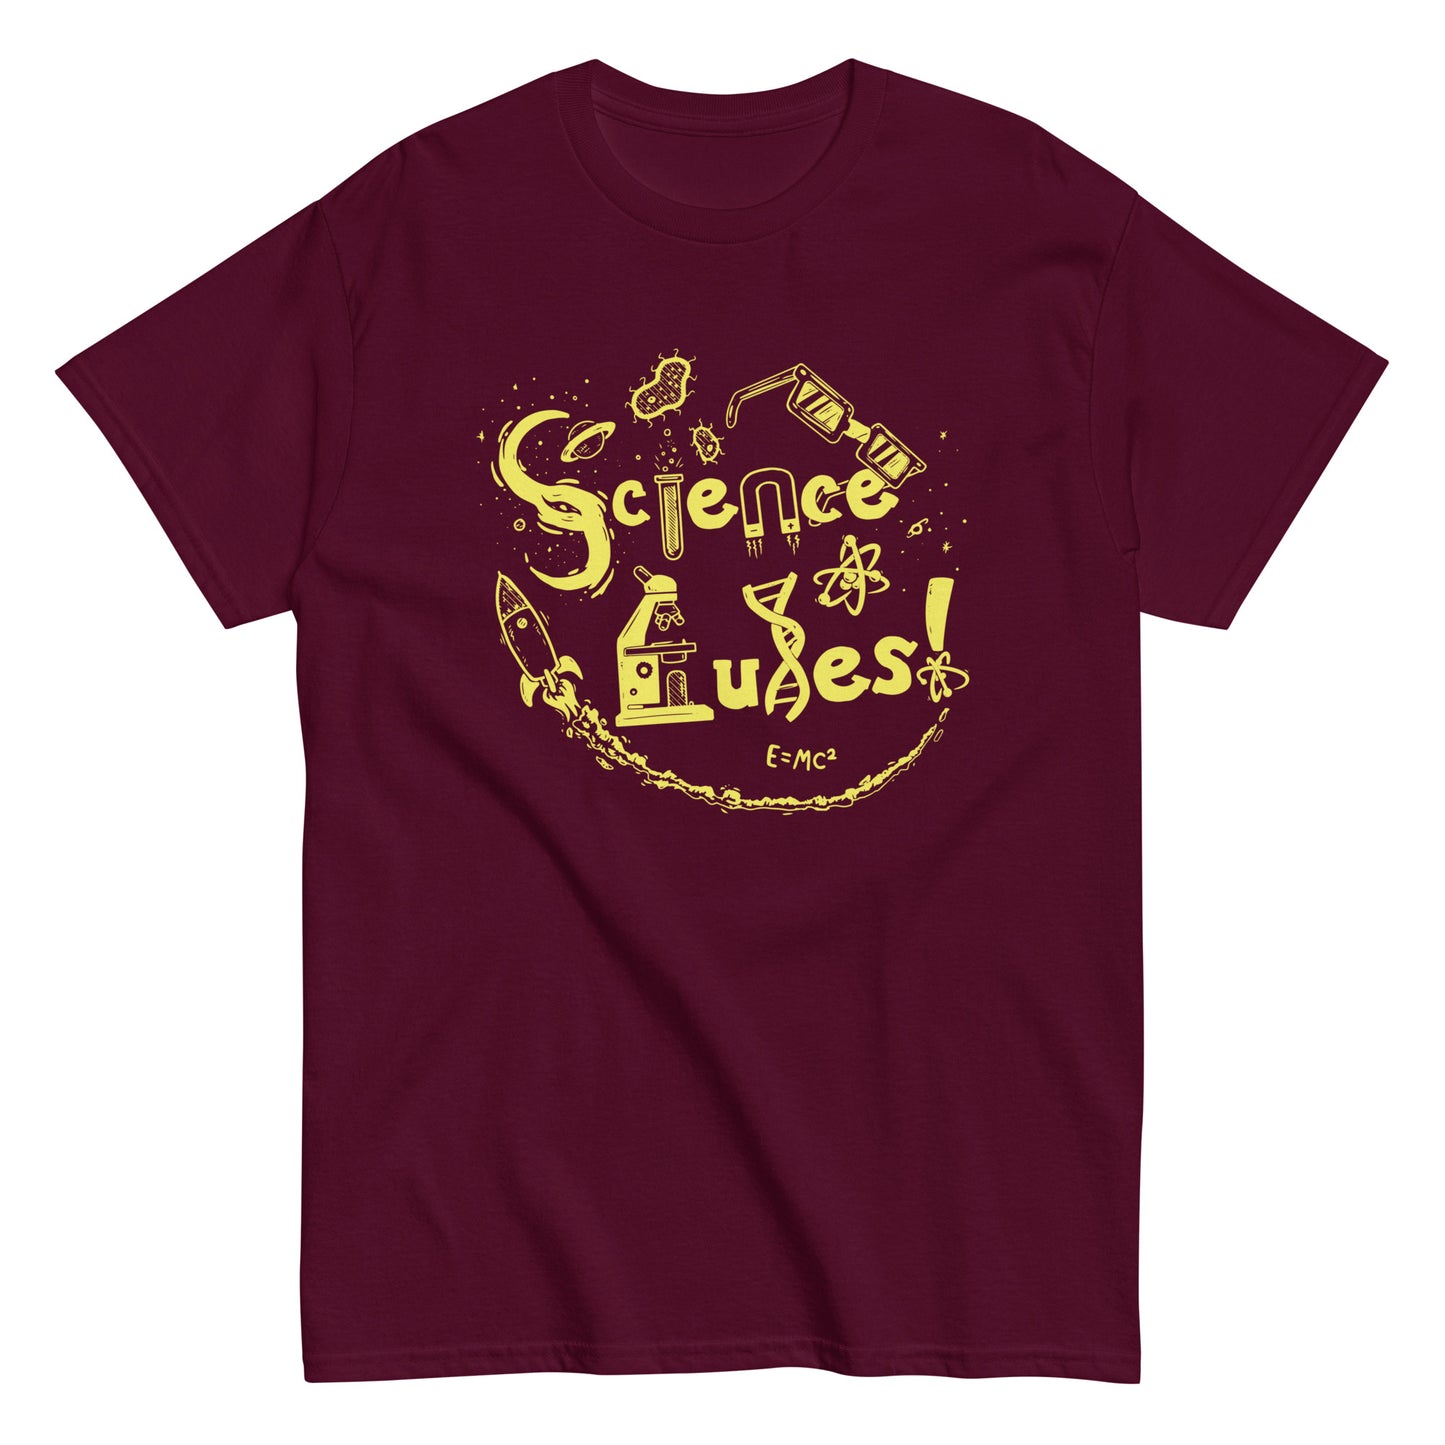 Science Rules! Men's Classic Tee